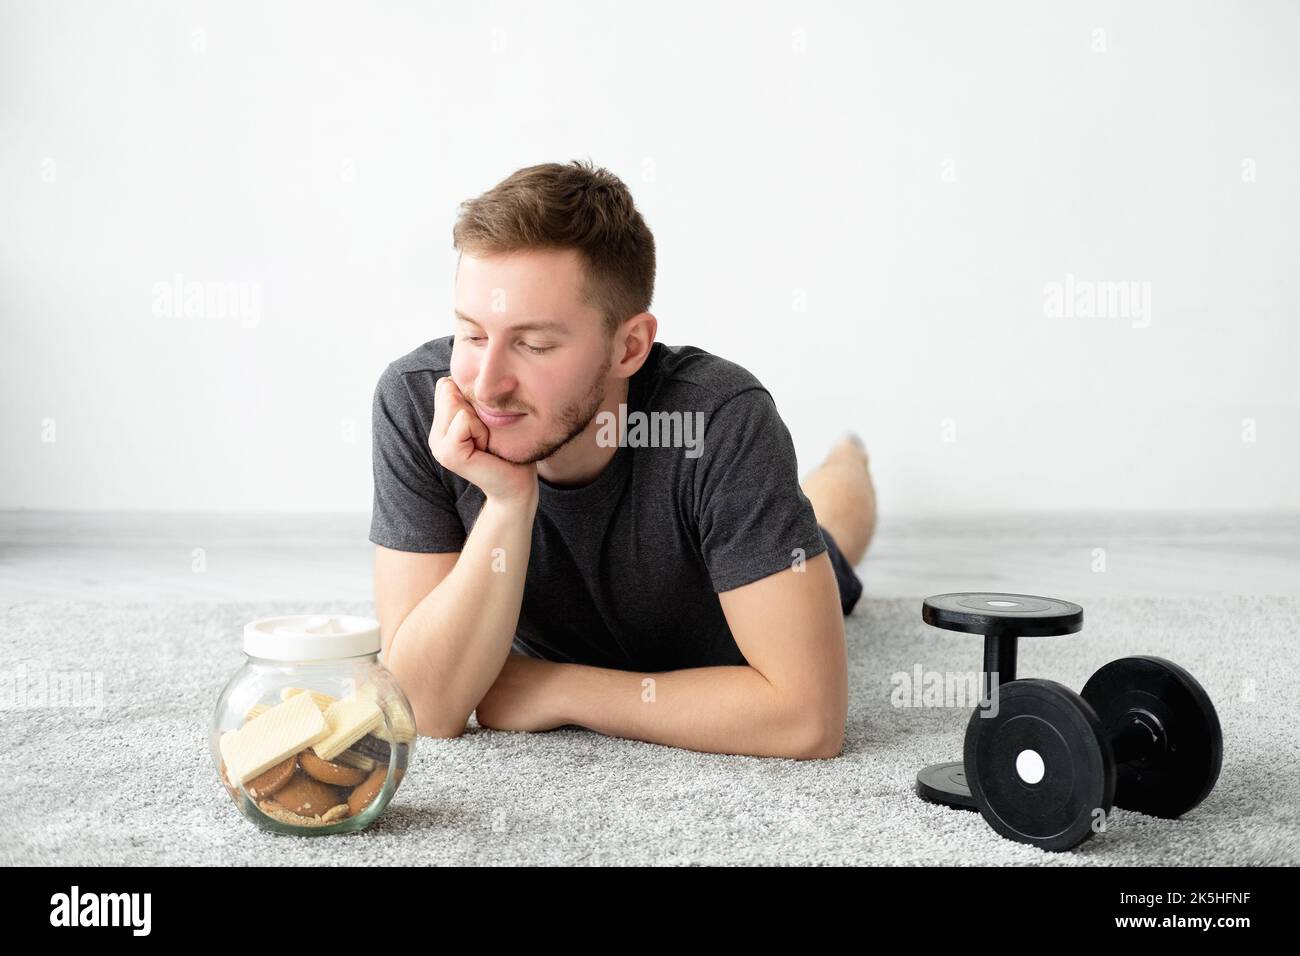 weight loss problem puzzled man fitness program Stock Photo